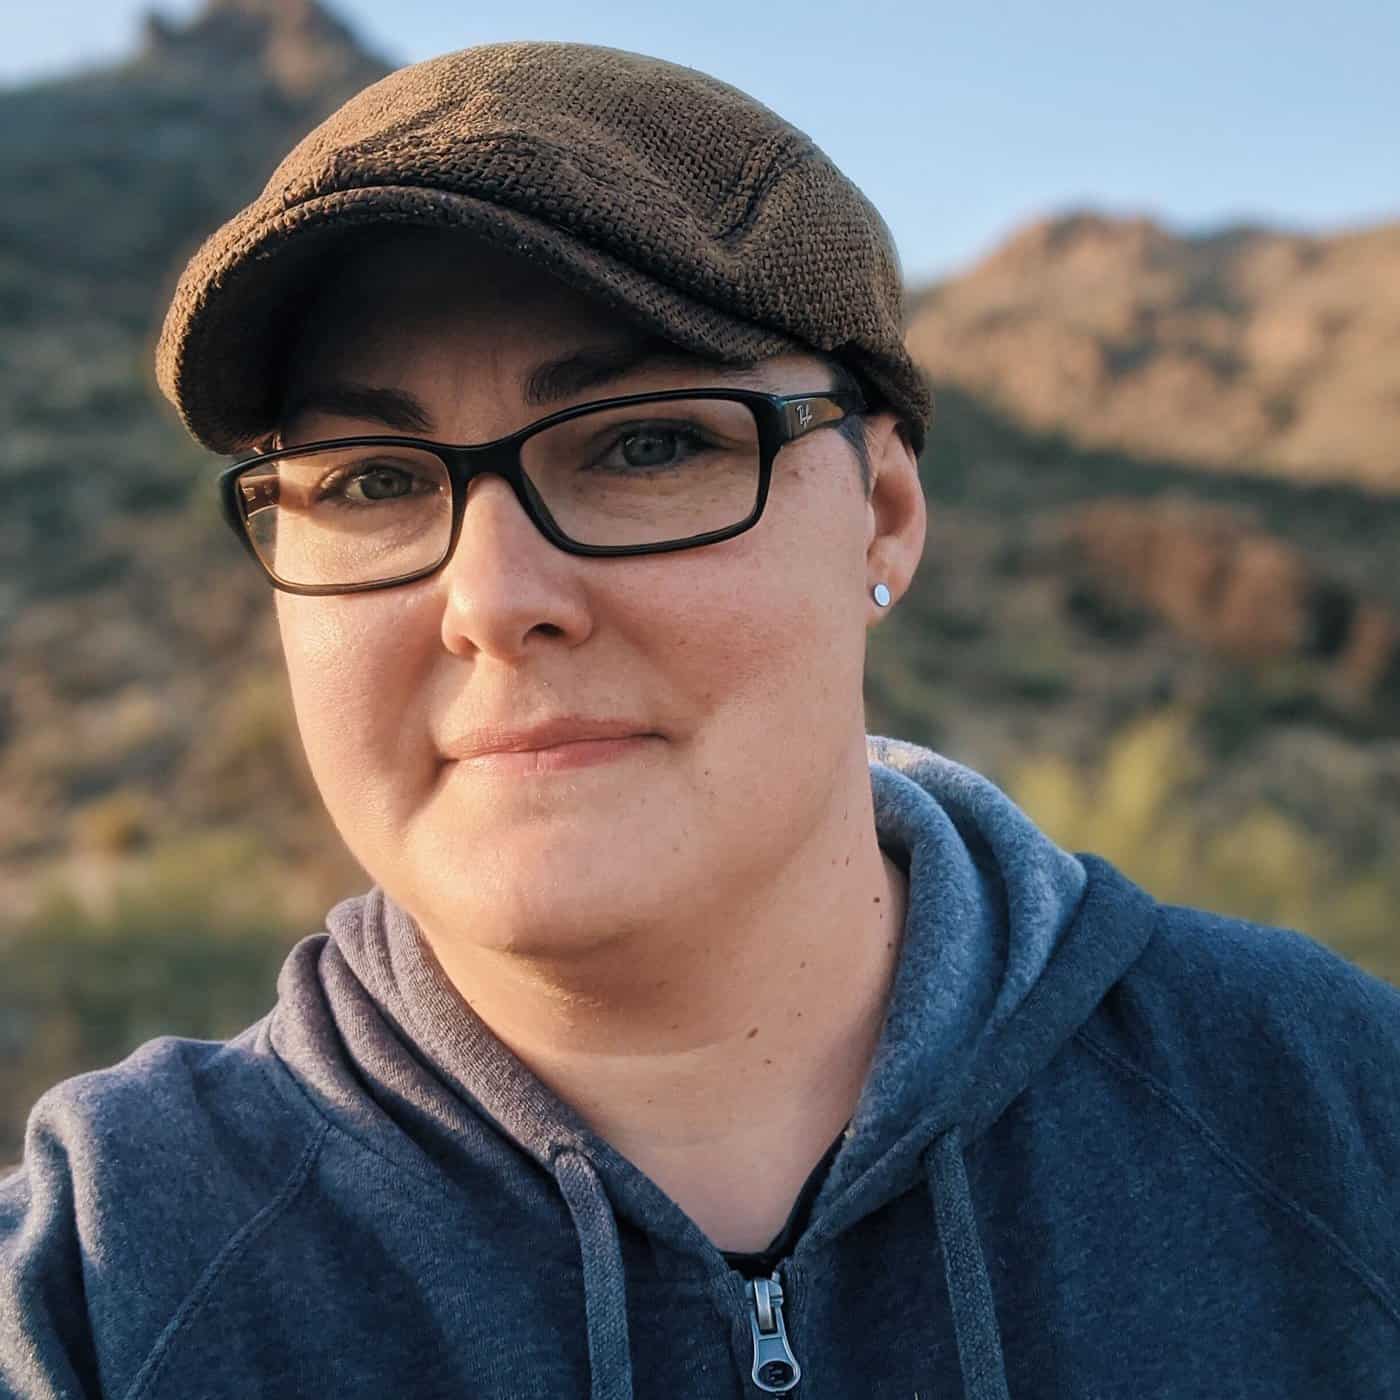 A person wearing a cap and glasses, slightly smiling, with a desert landscape behind.